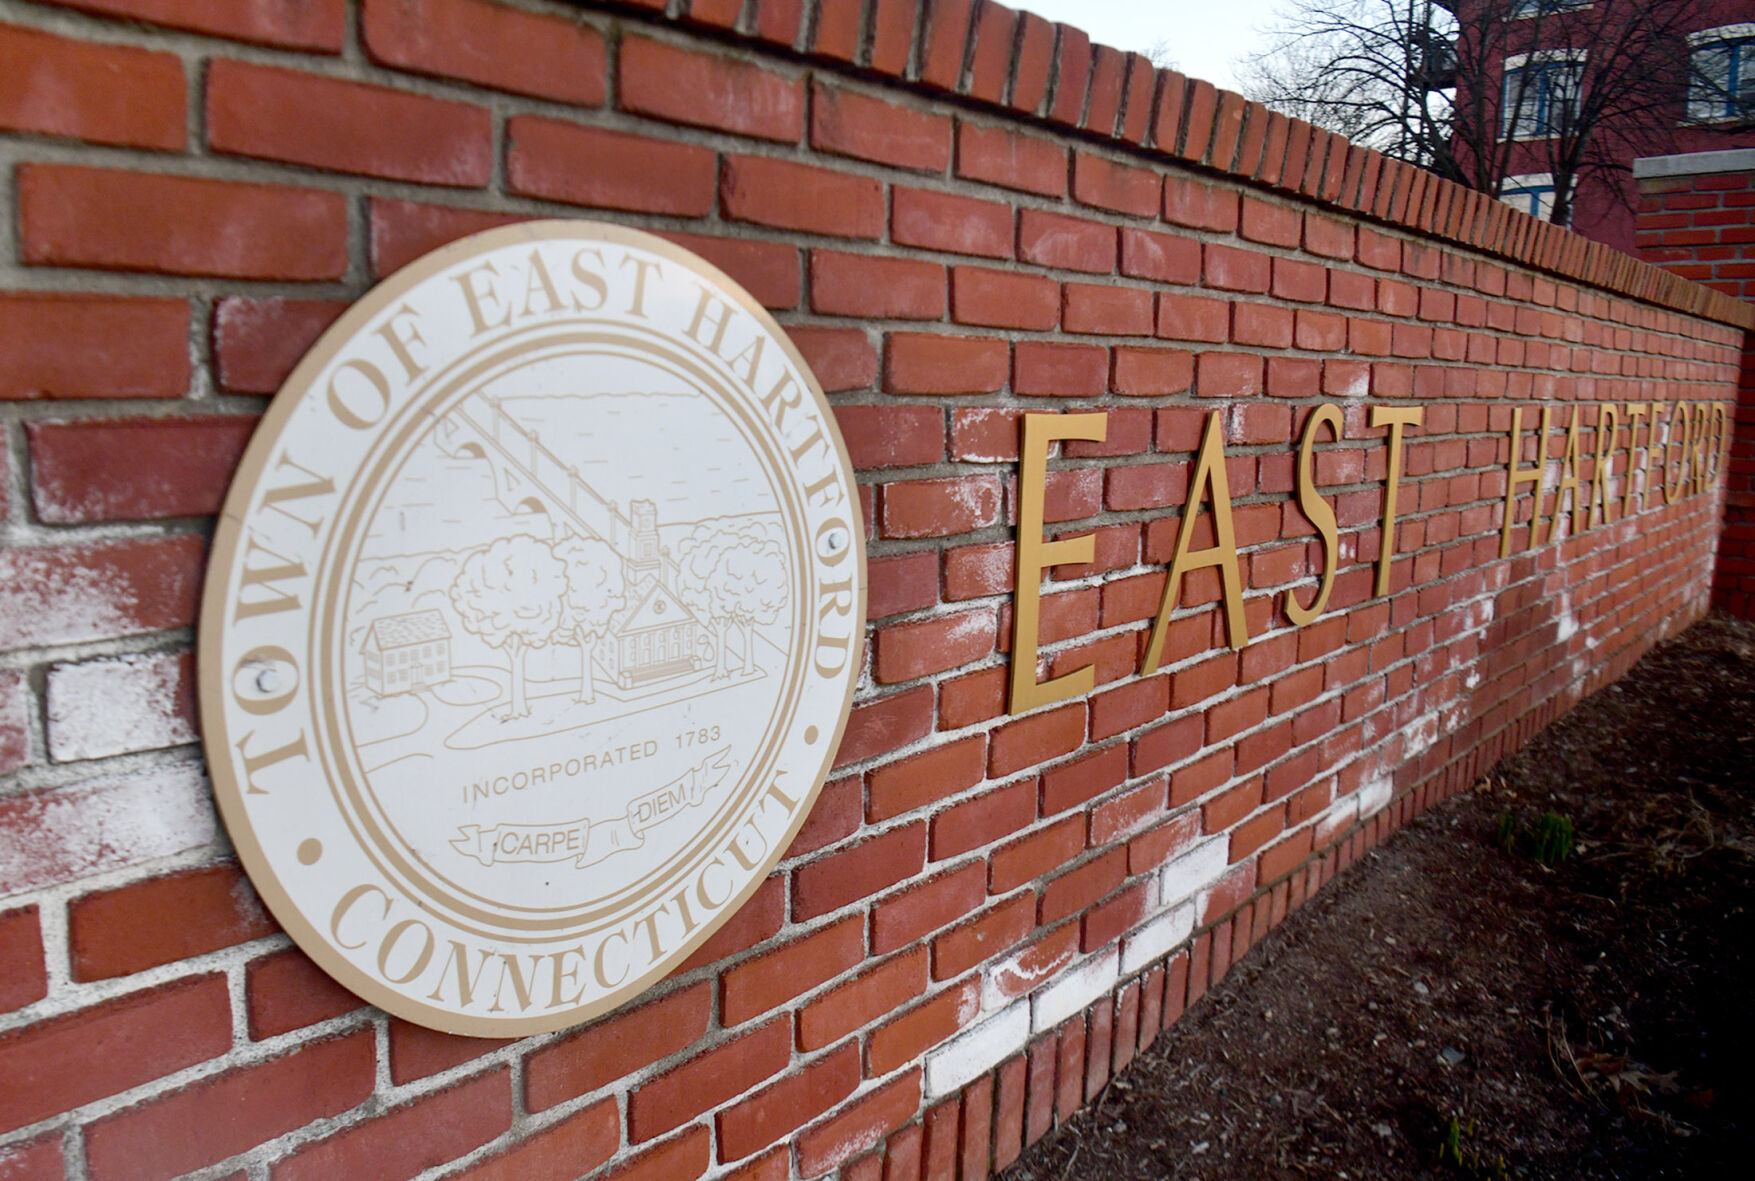 East Hartford housing project gets $3M from CT for community facility